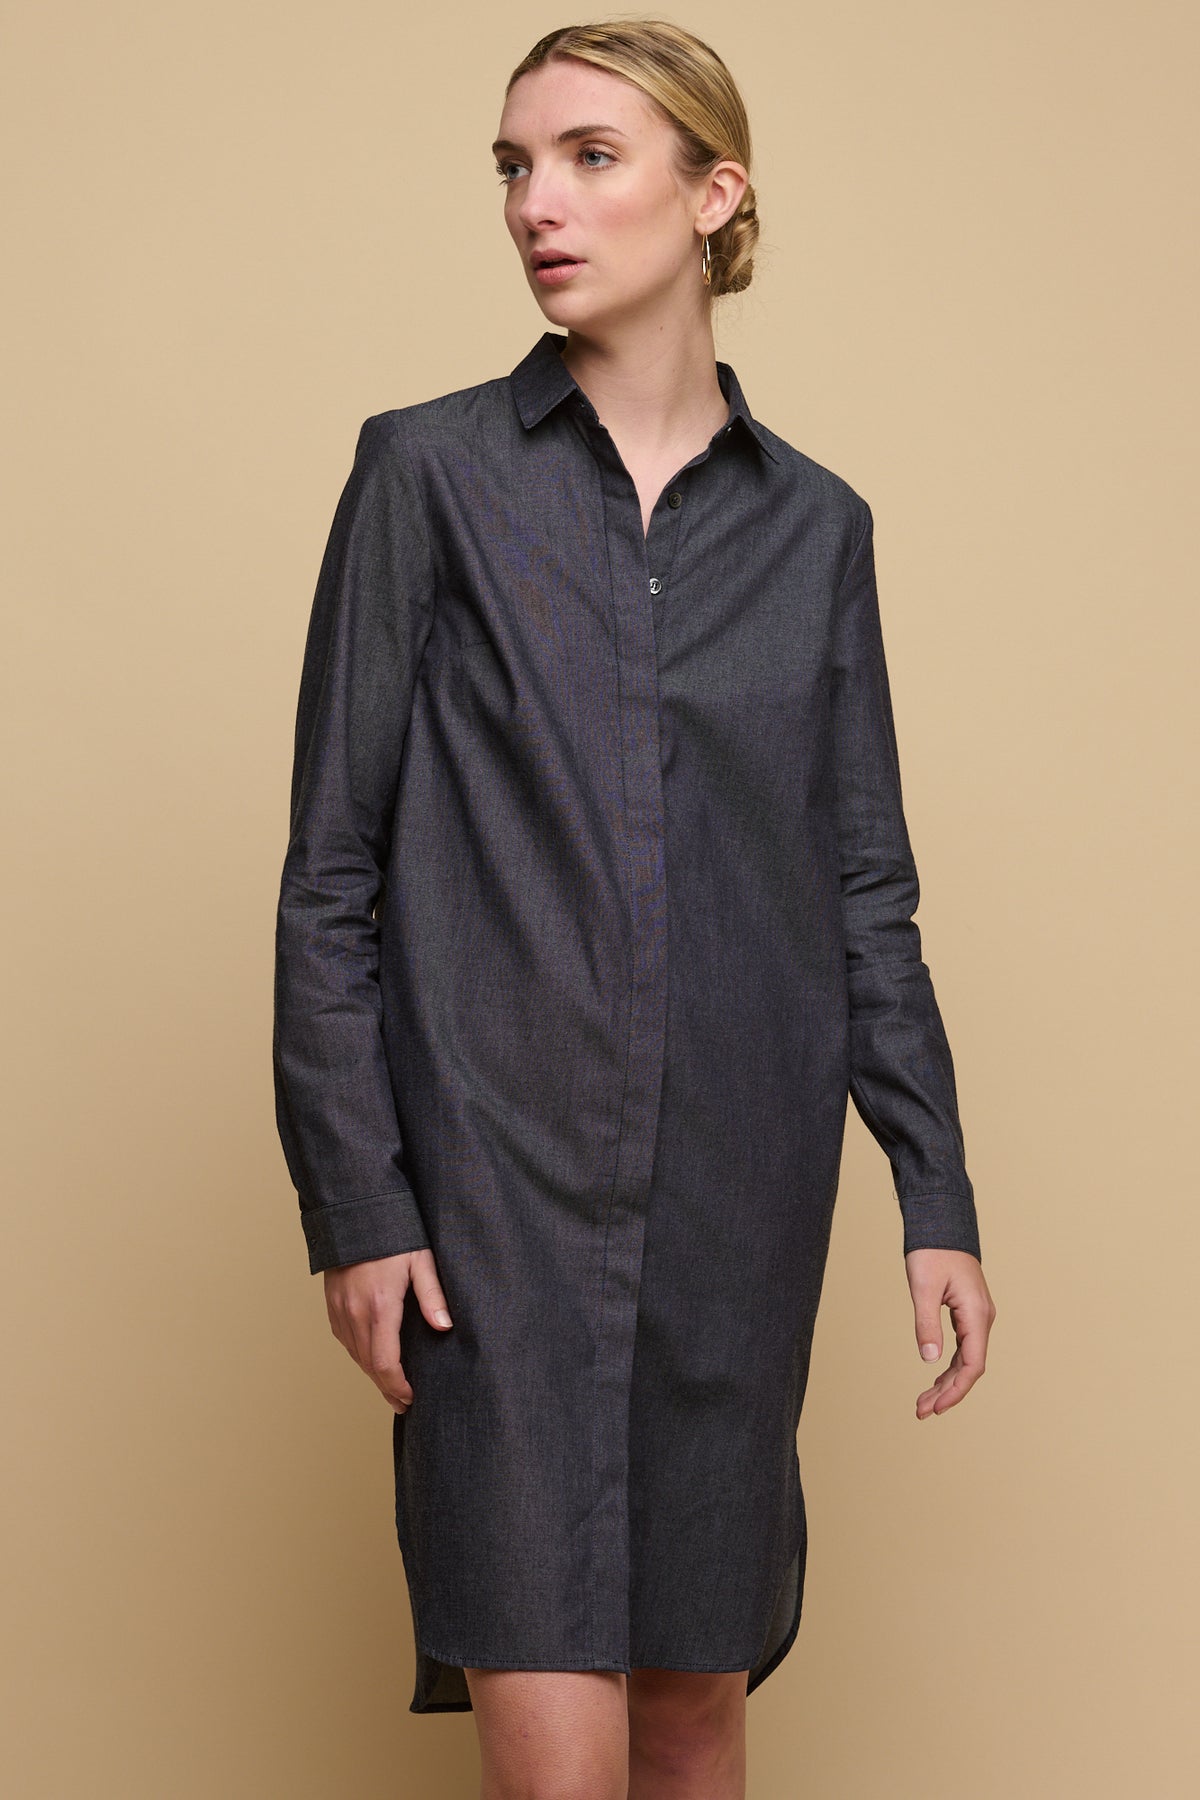 
            Knee up image of female wearing collared shirt dress in indigo with top three buttoned undone. 